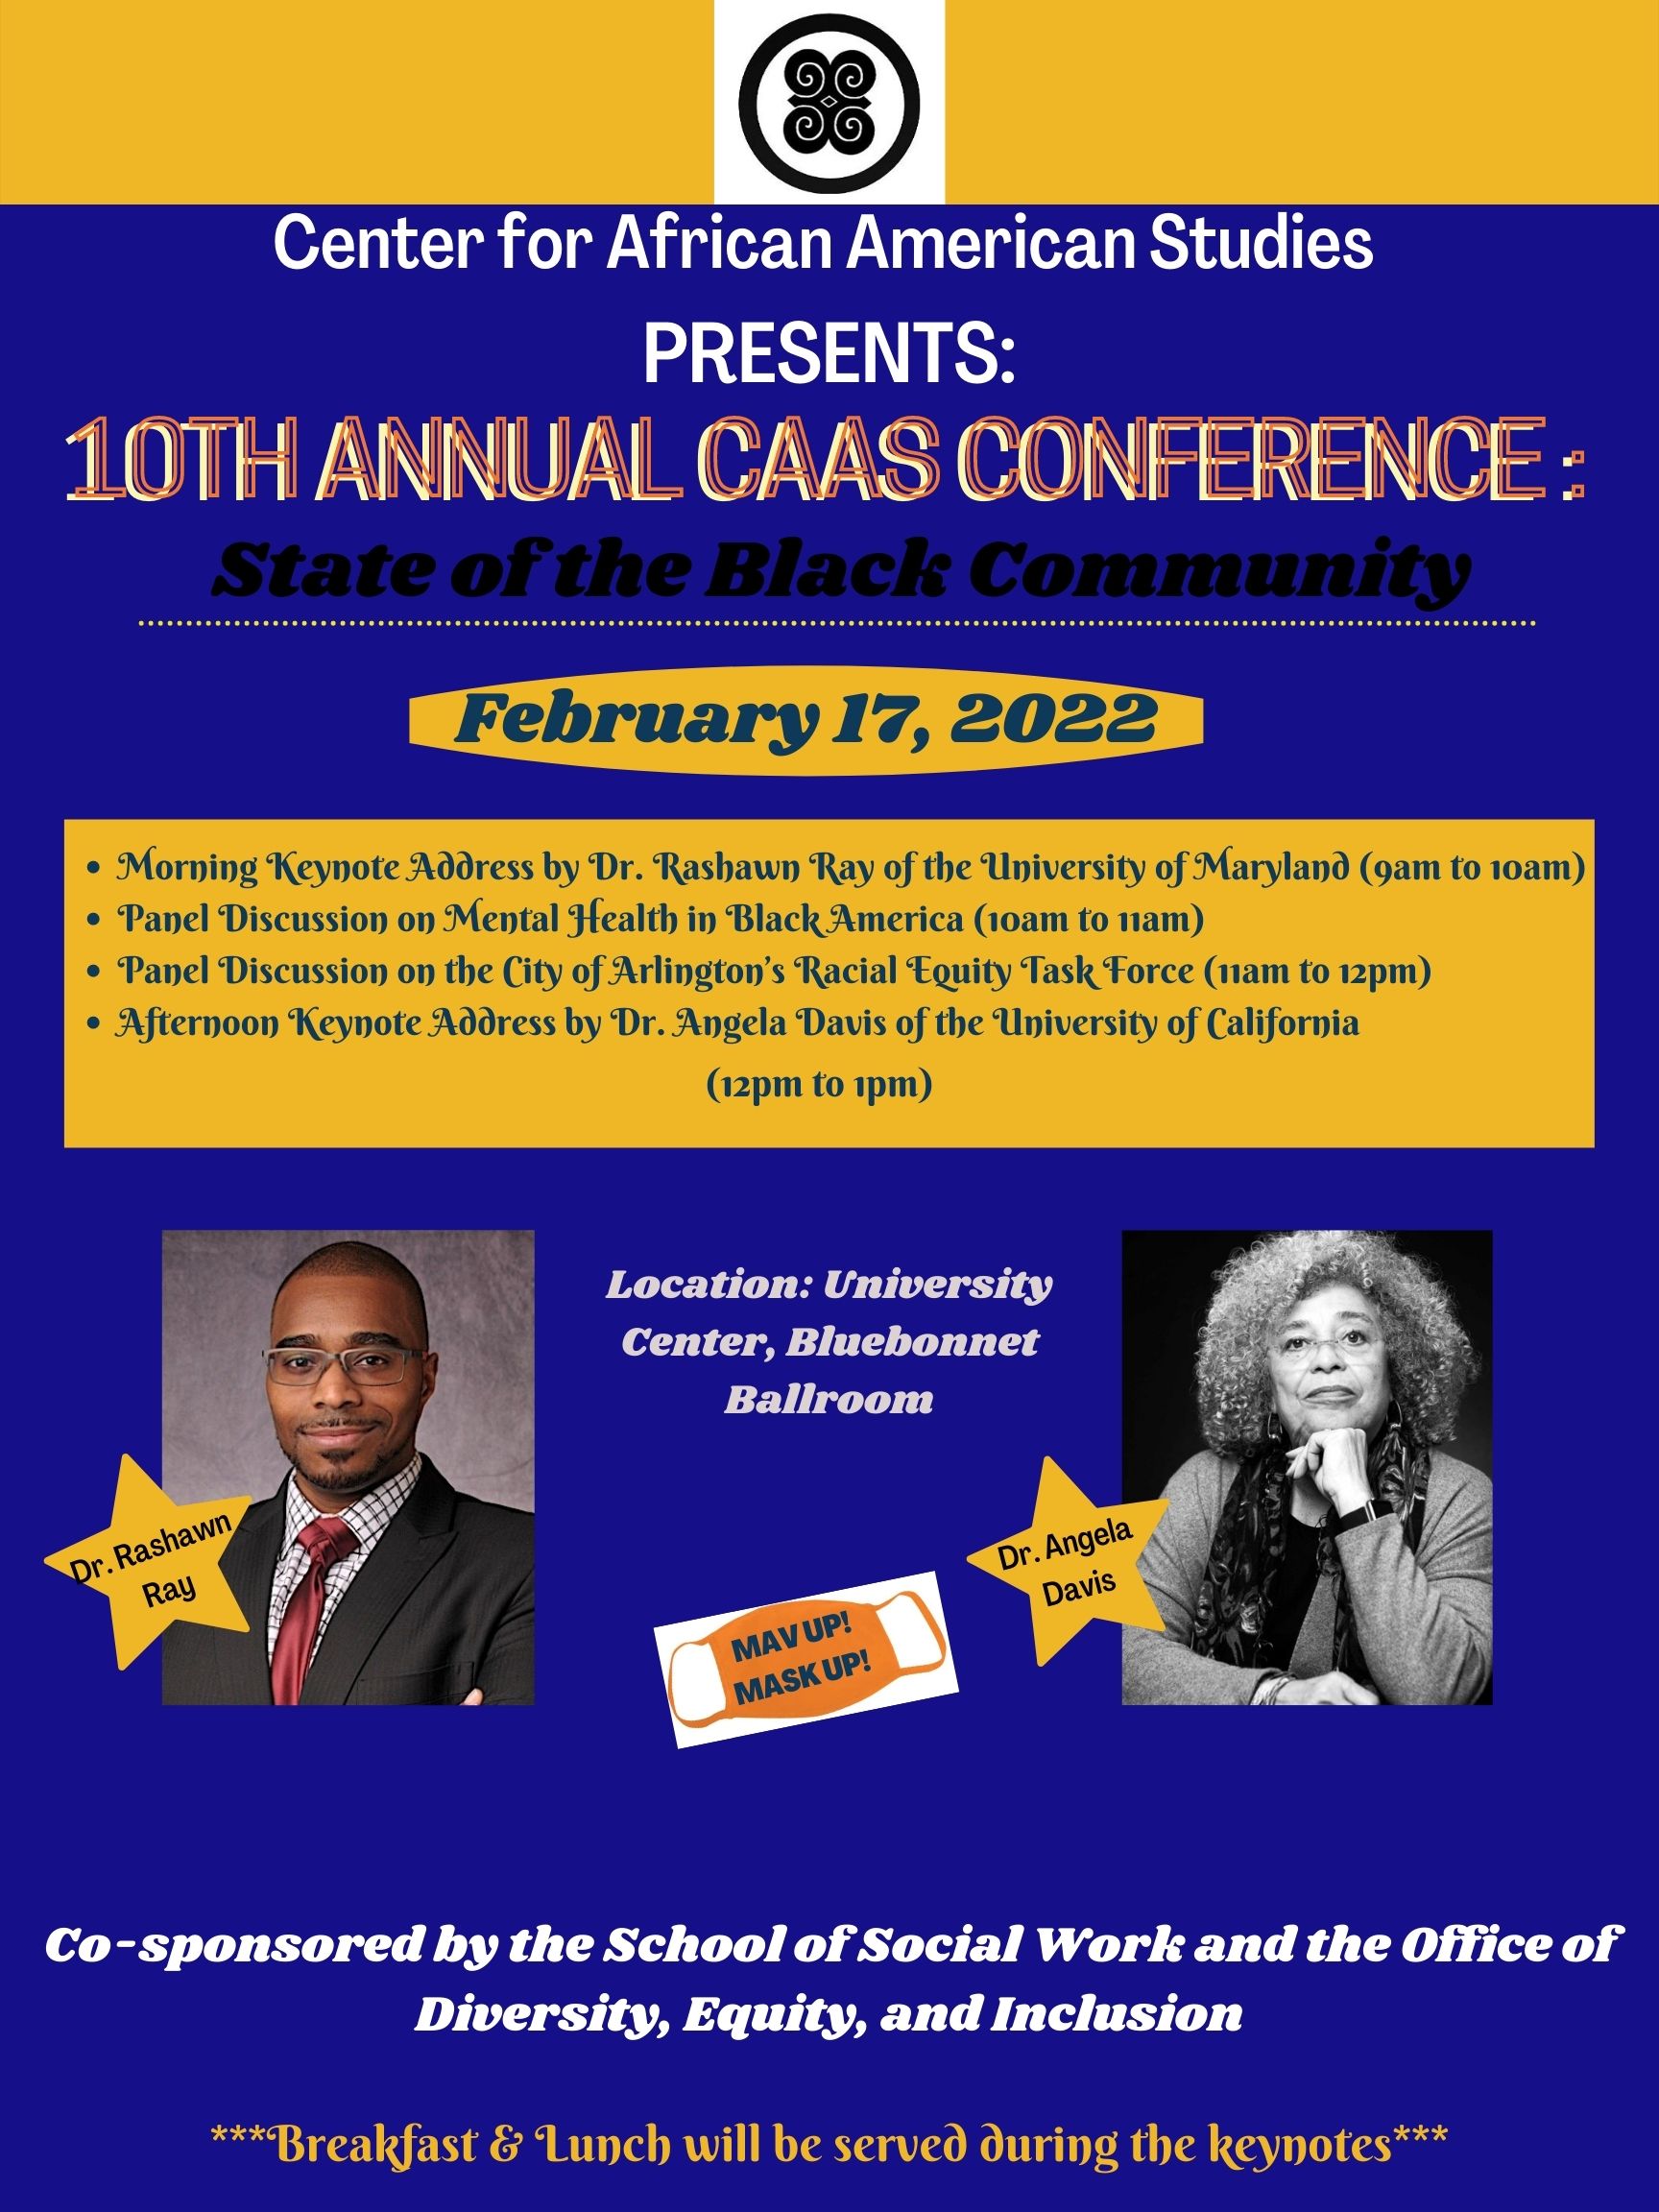 10th Annual CAAS Conference: State of the Black Community, February 17, 2022, keynote speakers Dr. Rashawn Ray and Dr. Angela Davis